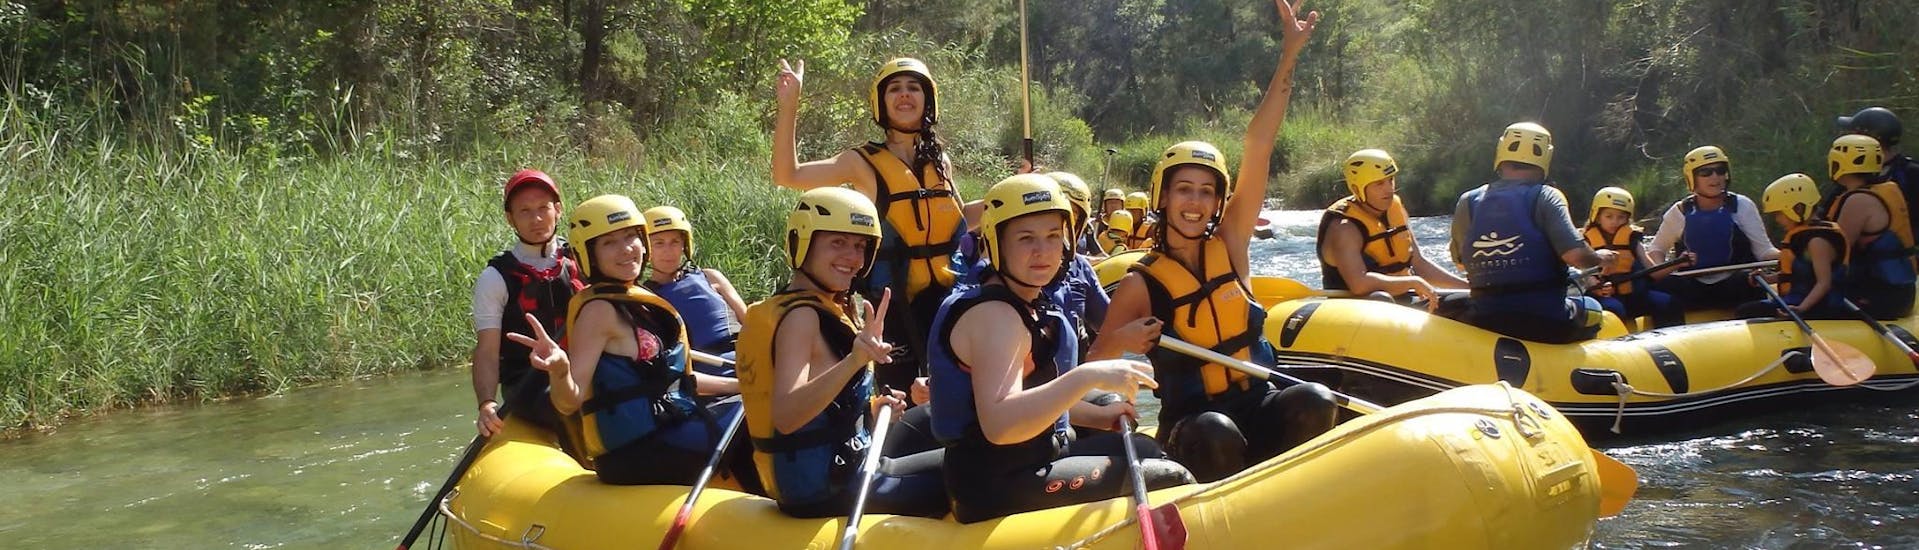 Classic Rafting on the Río Cabriel.